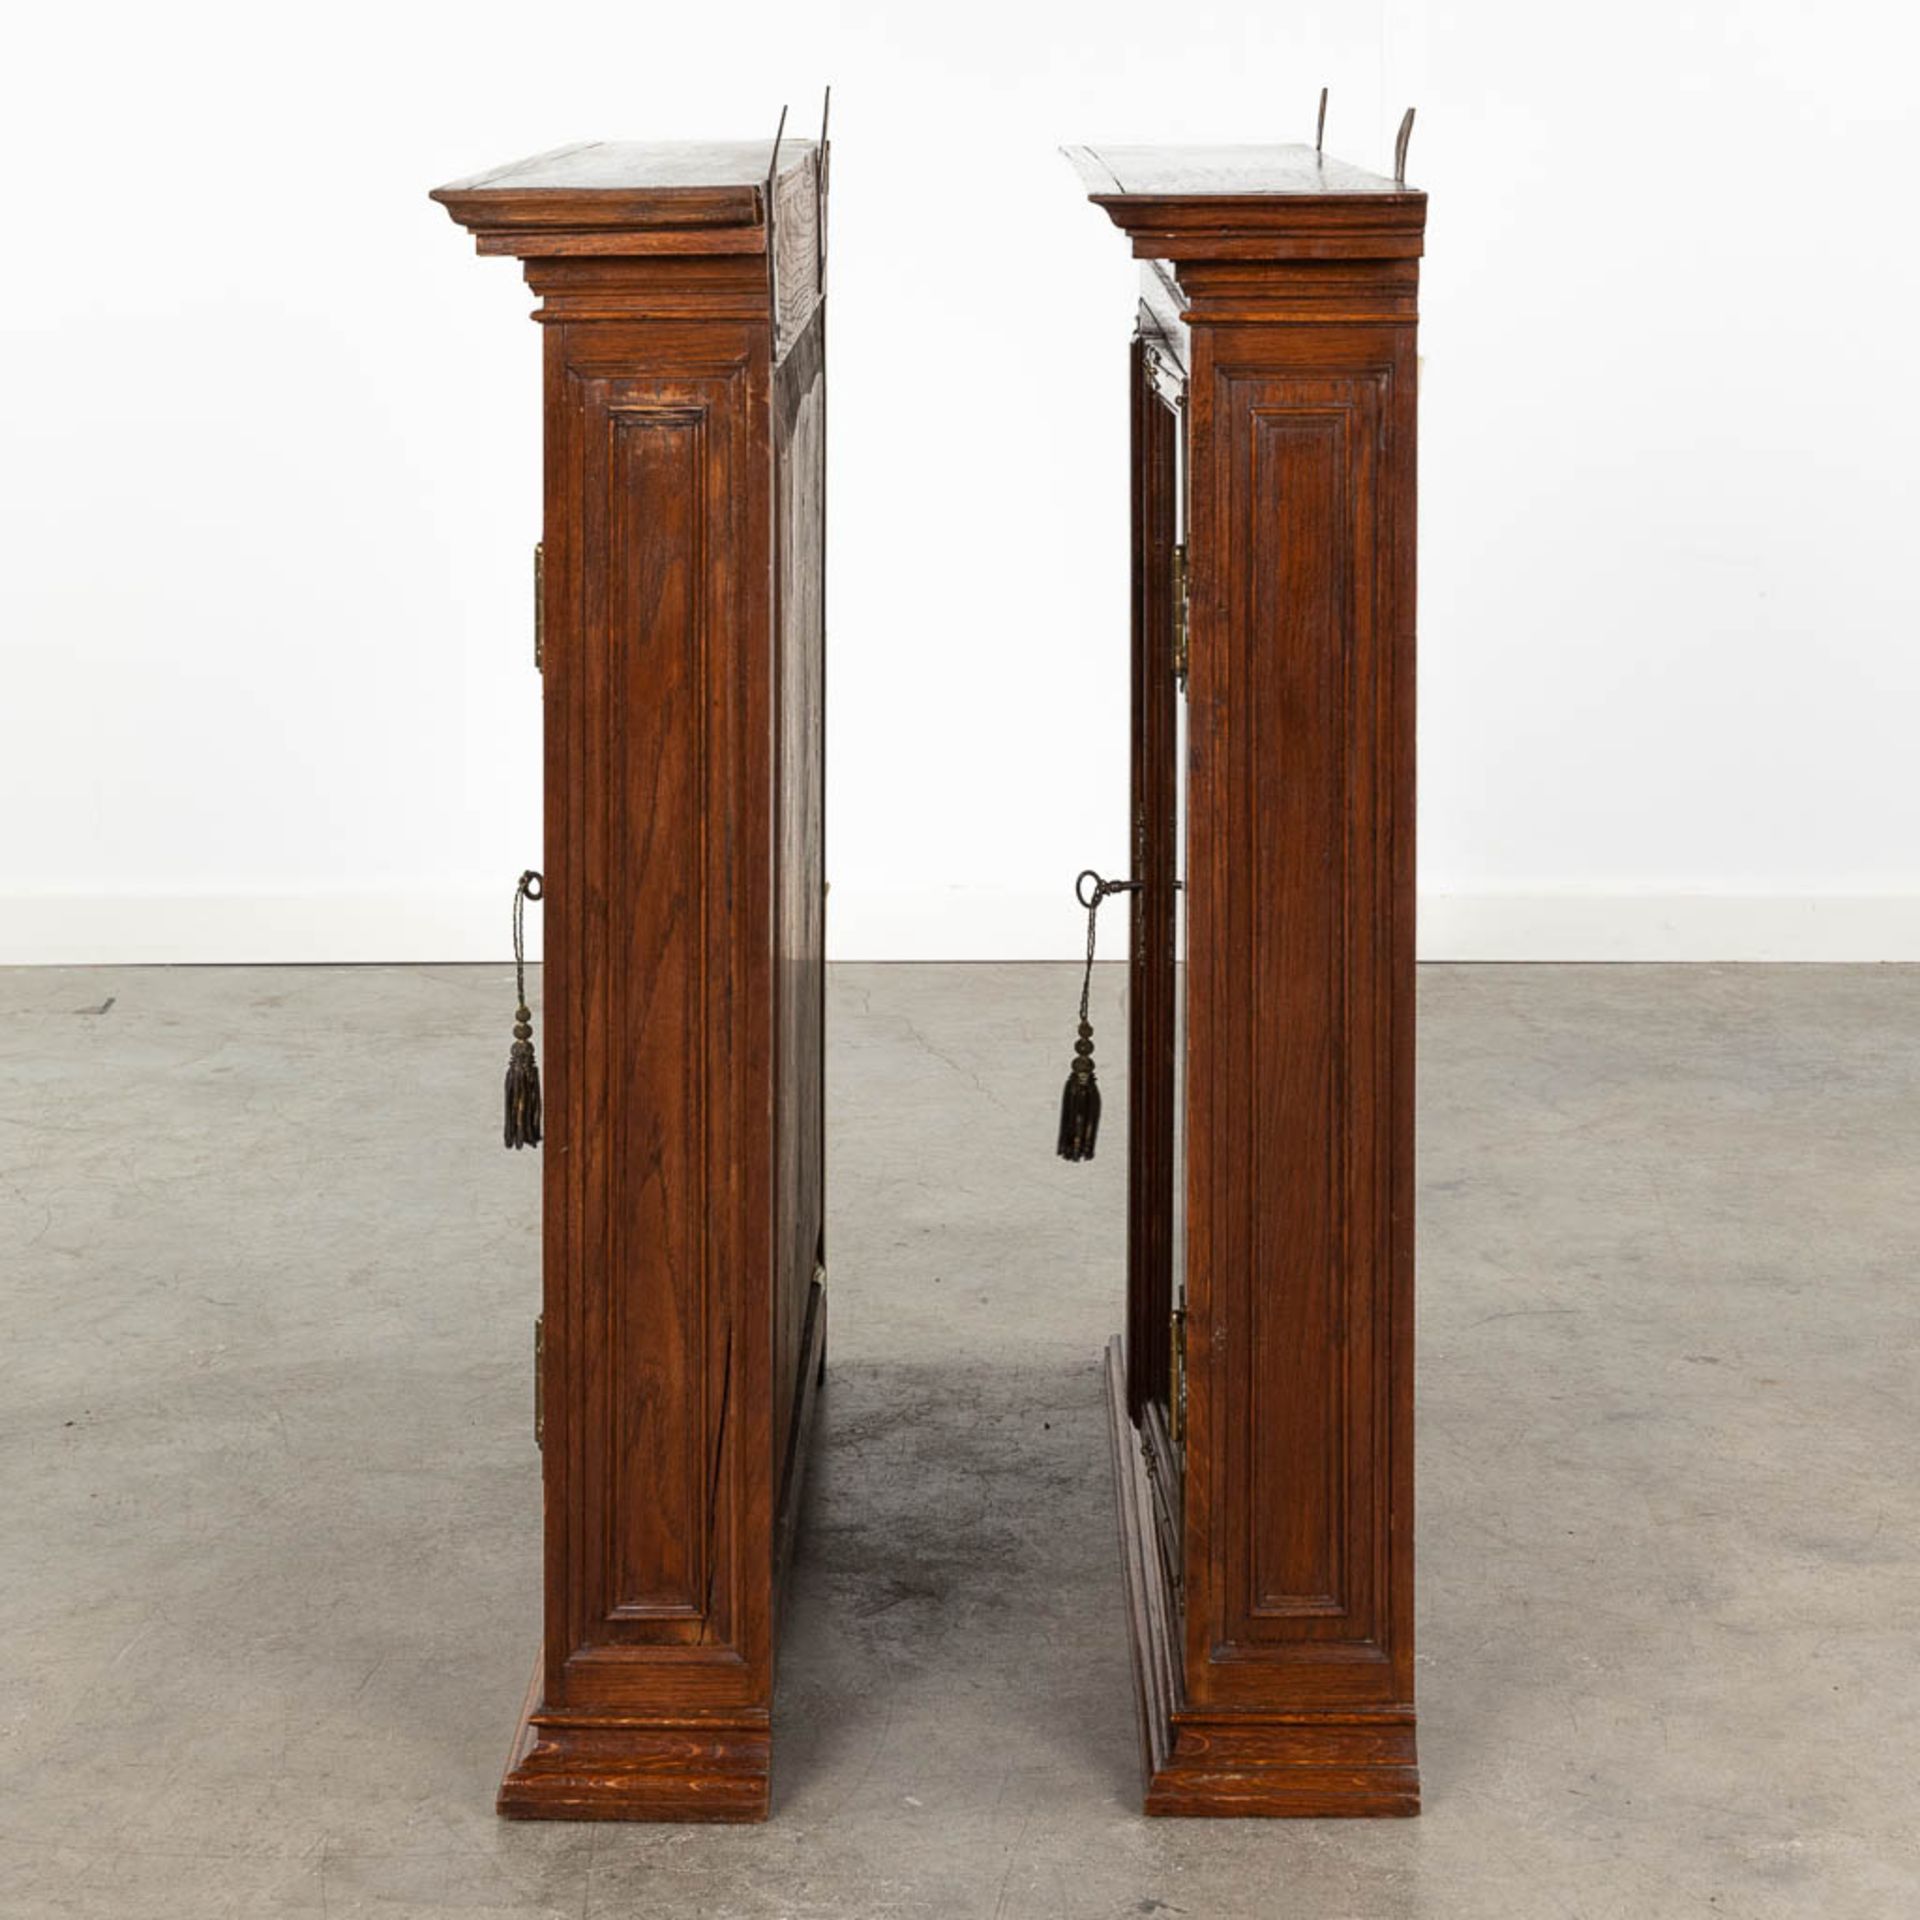 A pair of hanging cabinets, wood and glass. Circa 1900. (L: 17 x W: 75 x H: 83 cm) - Image 6 of 9